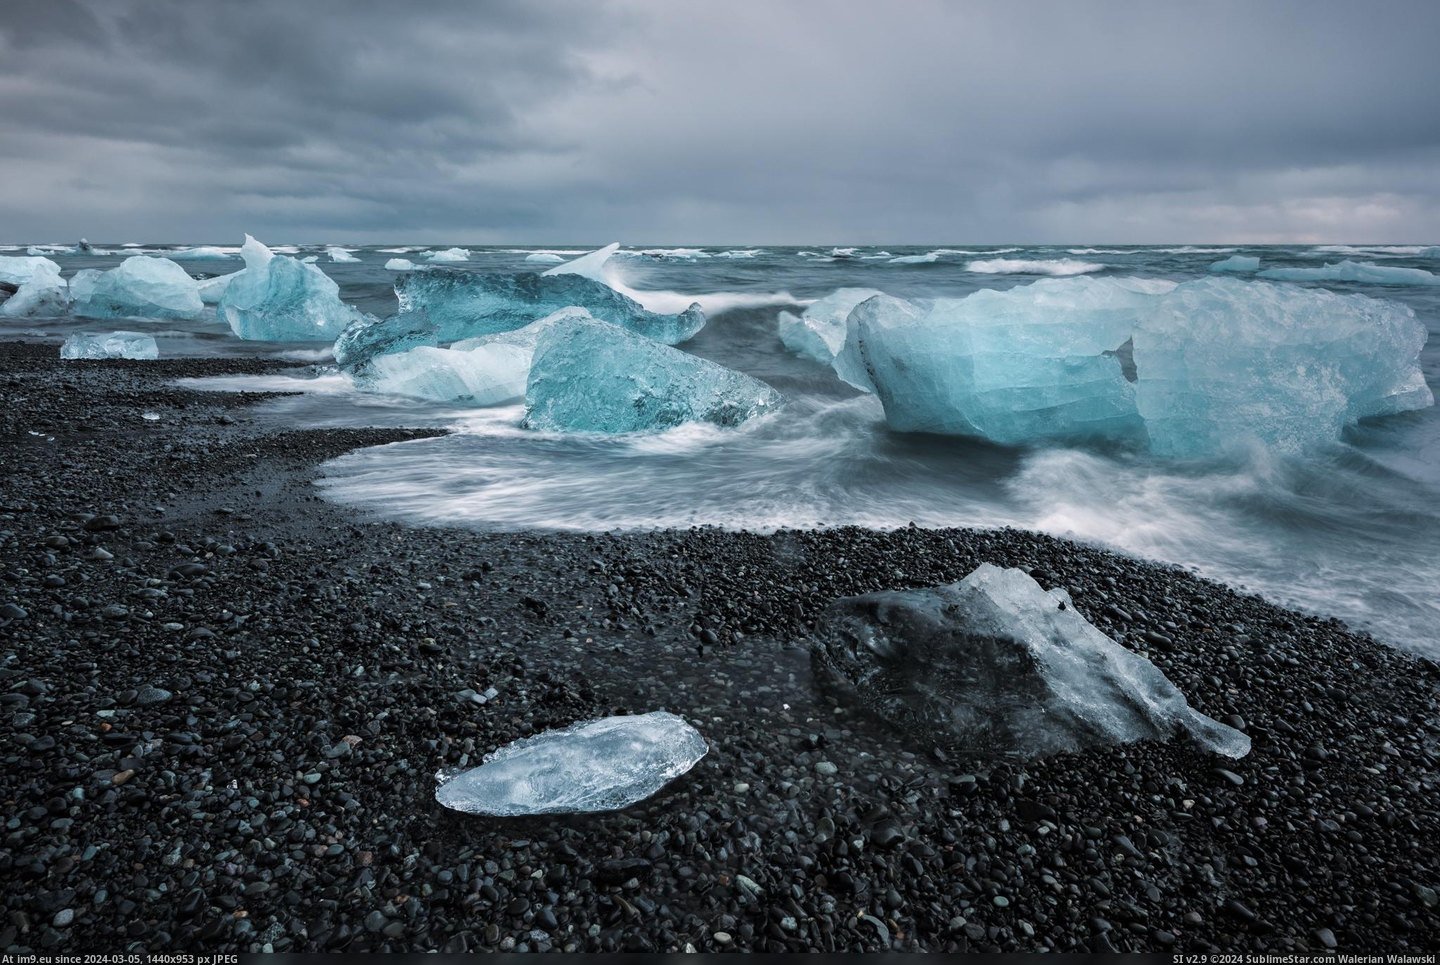 #Black #Beach #Road #Volcanic #Washing #Glacial #Icebergs #Sand #Ring #Lagoon [Earthporn]  Icebergs washing up on a black volcanic sand beach across the ring road from the glacial lagoon - Jökulsárlón, Icel Pic. (Изображение из альбом My r/EARTHPORN favs))